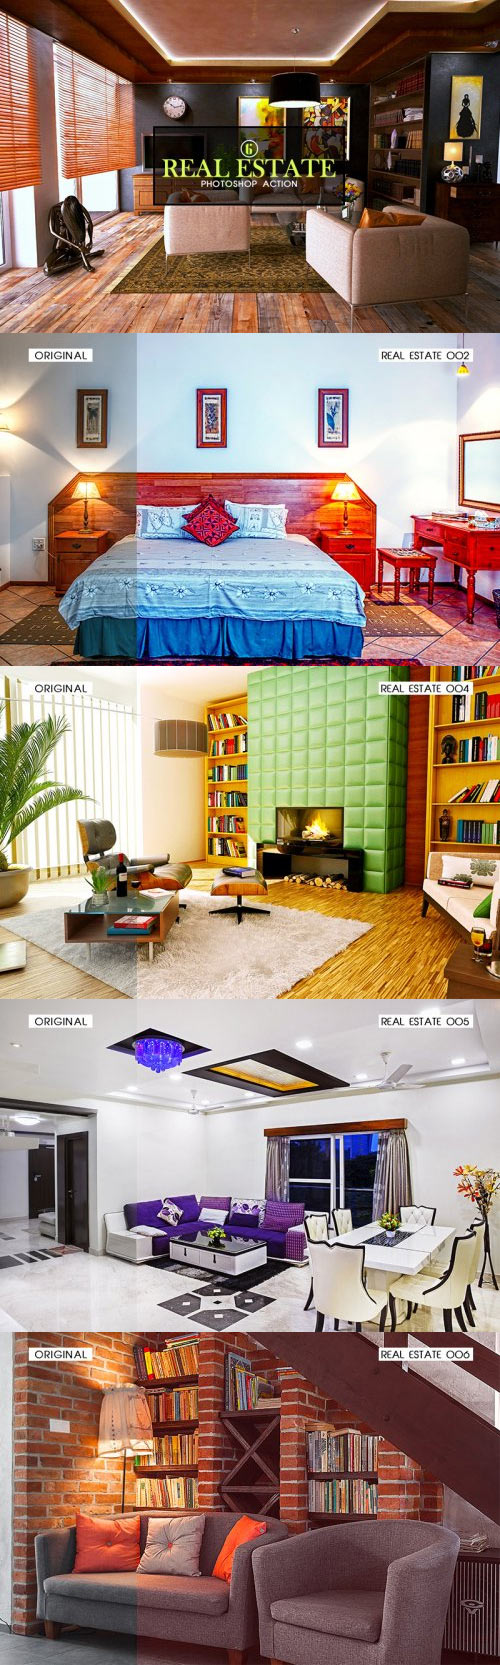 6 Real Estate Photoshop Action